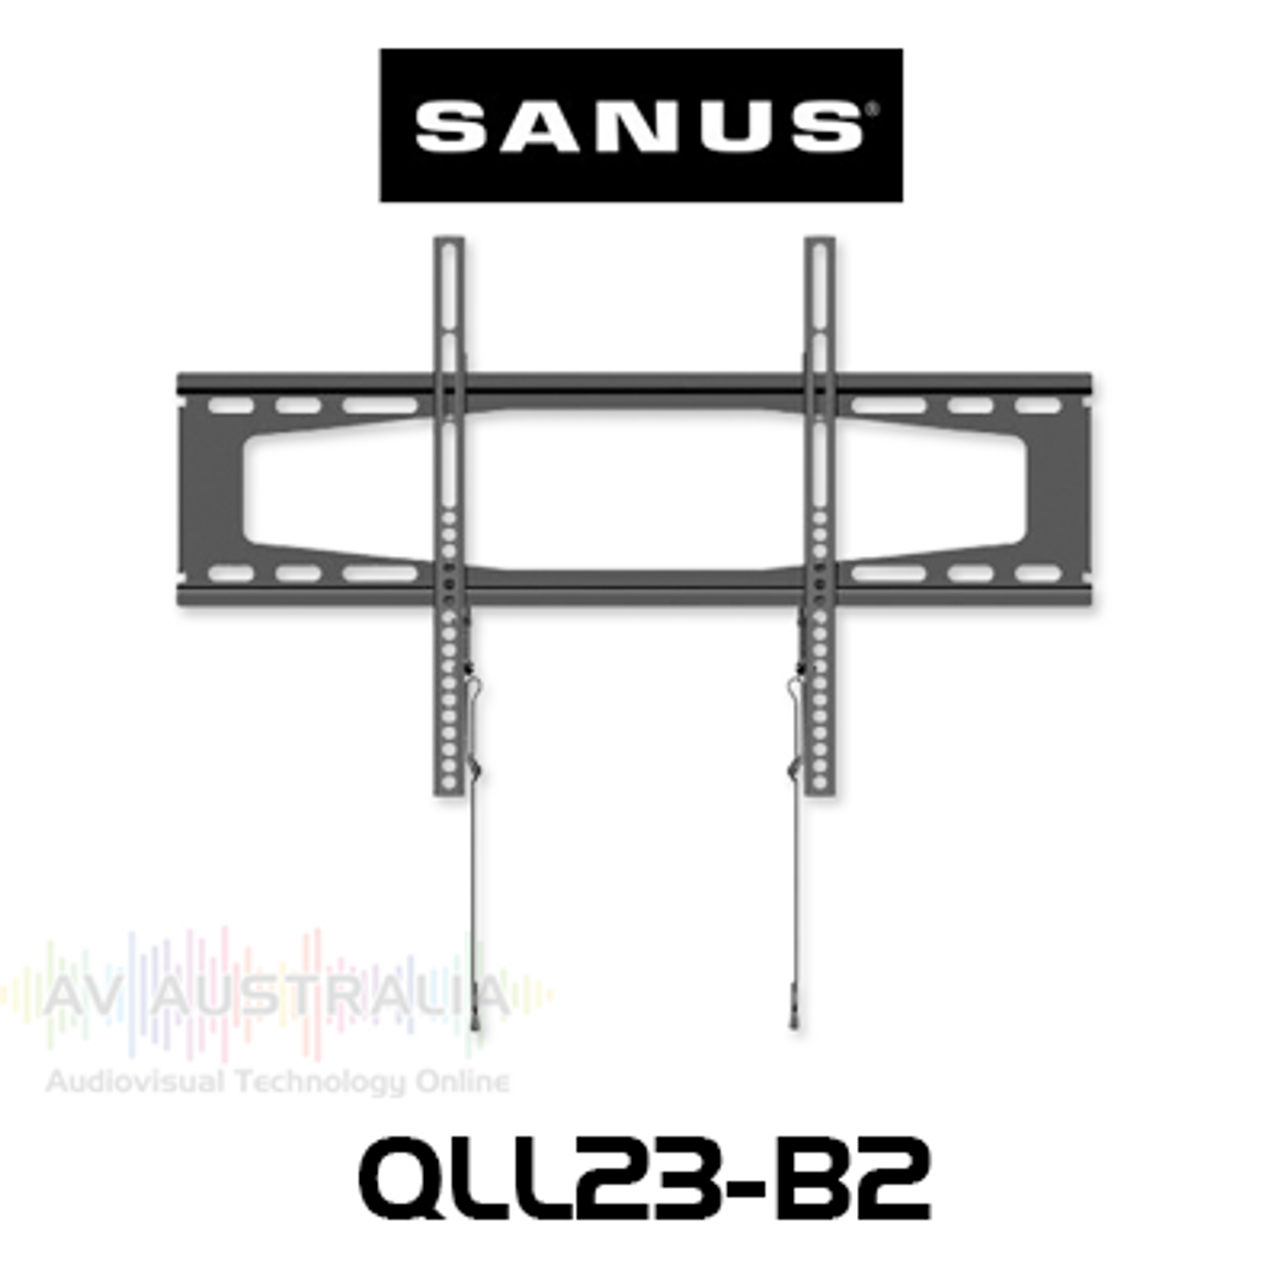 Sanus QLL23-B2 Low Profile Fixed Wall Mount For 40"-70" Displays (45kg Max)